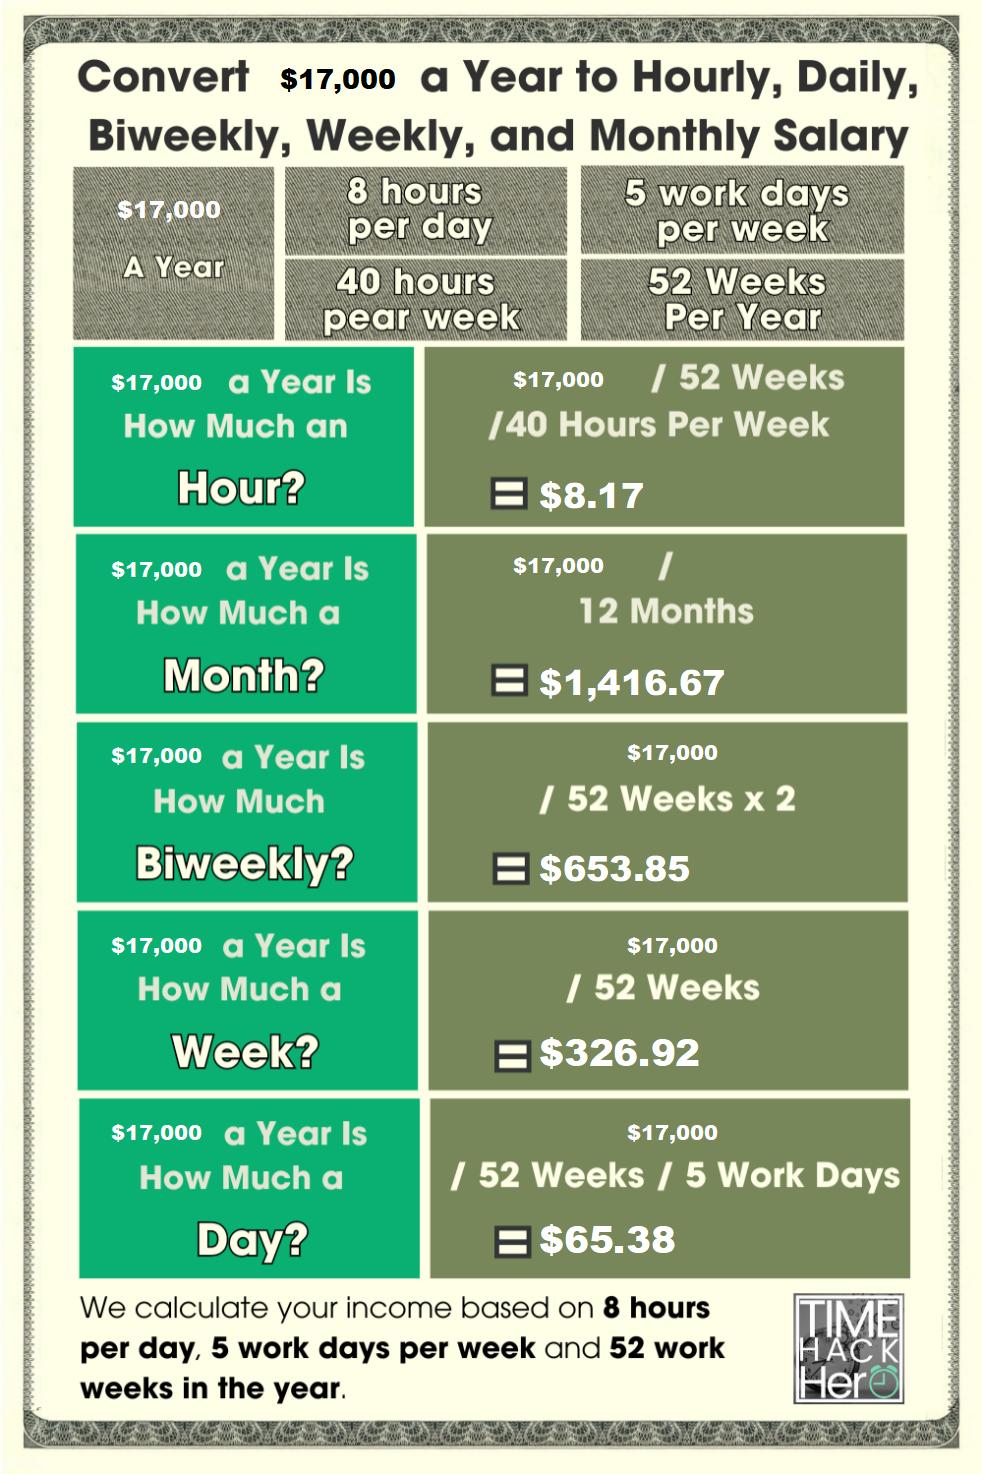 Convert $17000 a Year to Hourly, Daily, Biweekly, Weekly, and Monthly Salary